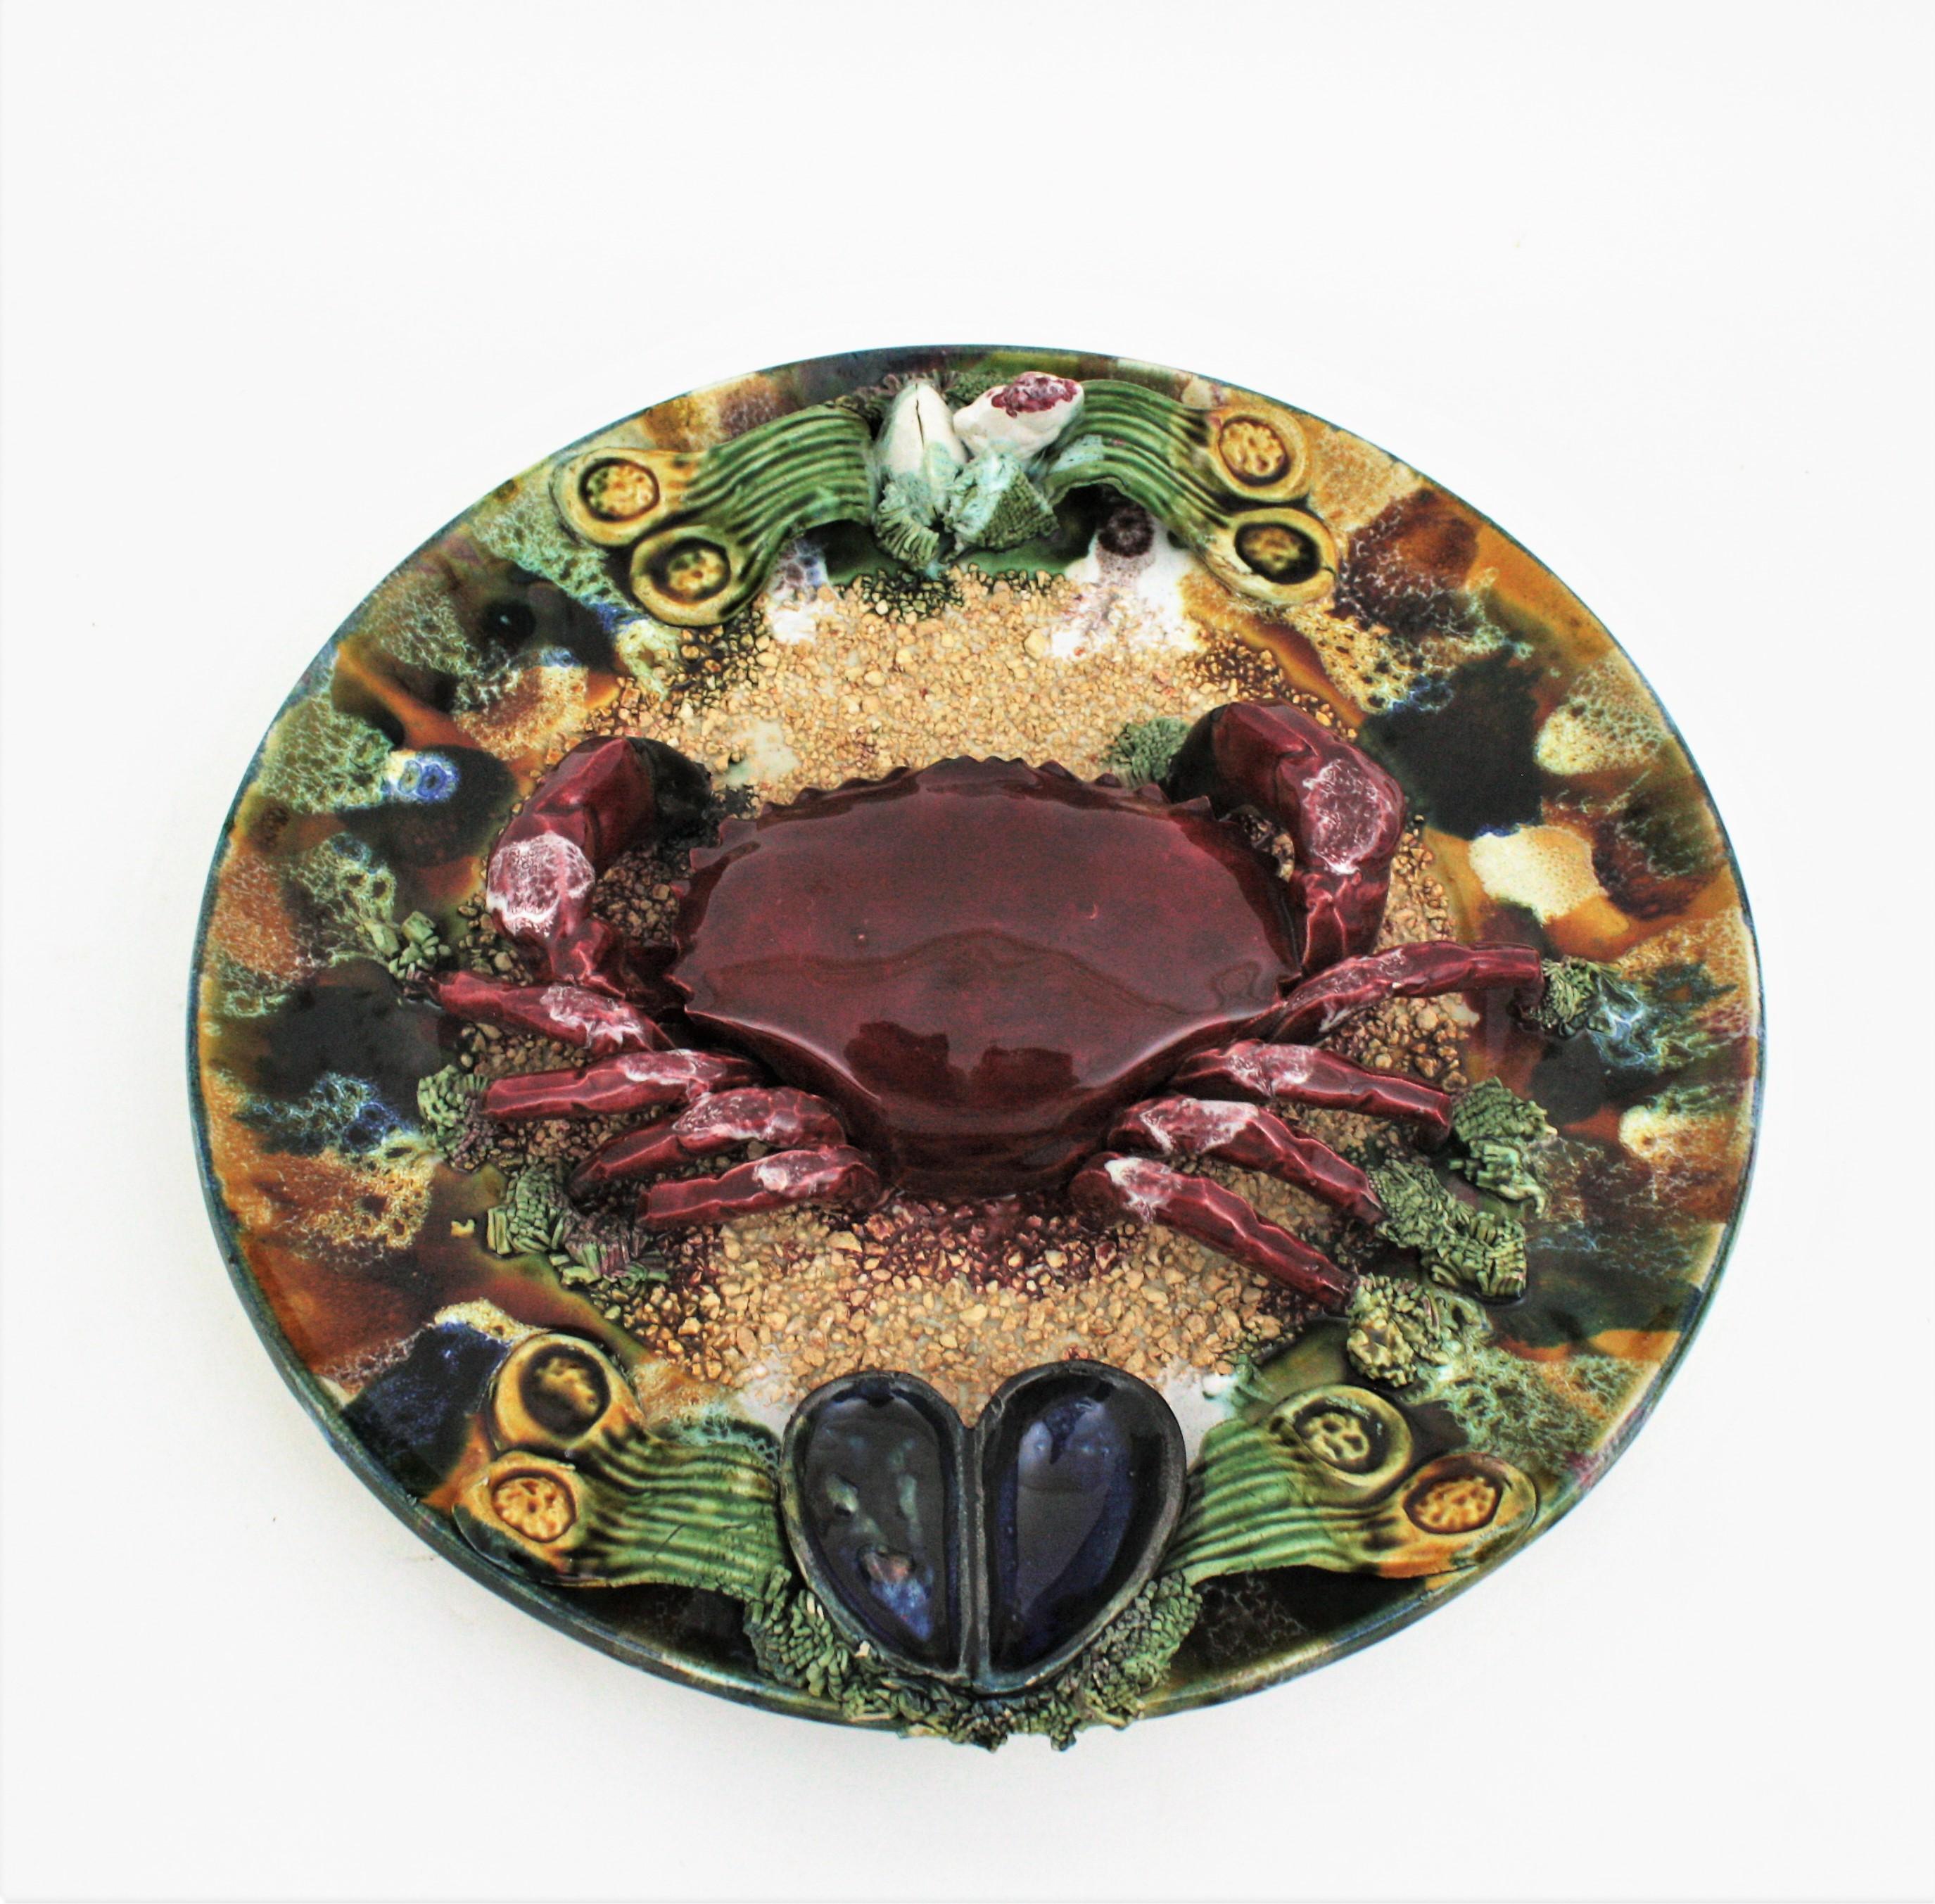 Impressive hand painted Majolica glazed ceramic crab and sea life trompe l'oeil wall plate, Portugal, 1940s-1950s.
Such a realistic representation with a crab on a sea landscape background.
This plate will add a cool midcentury accent in a beach